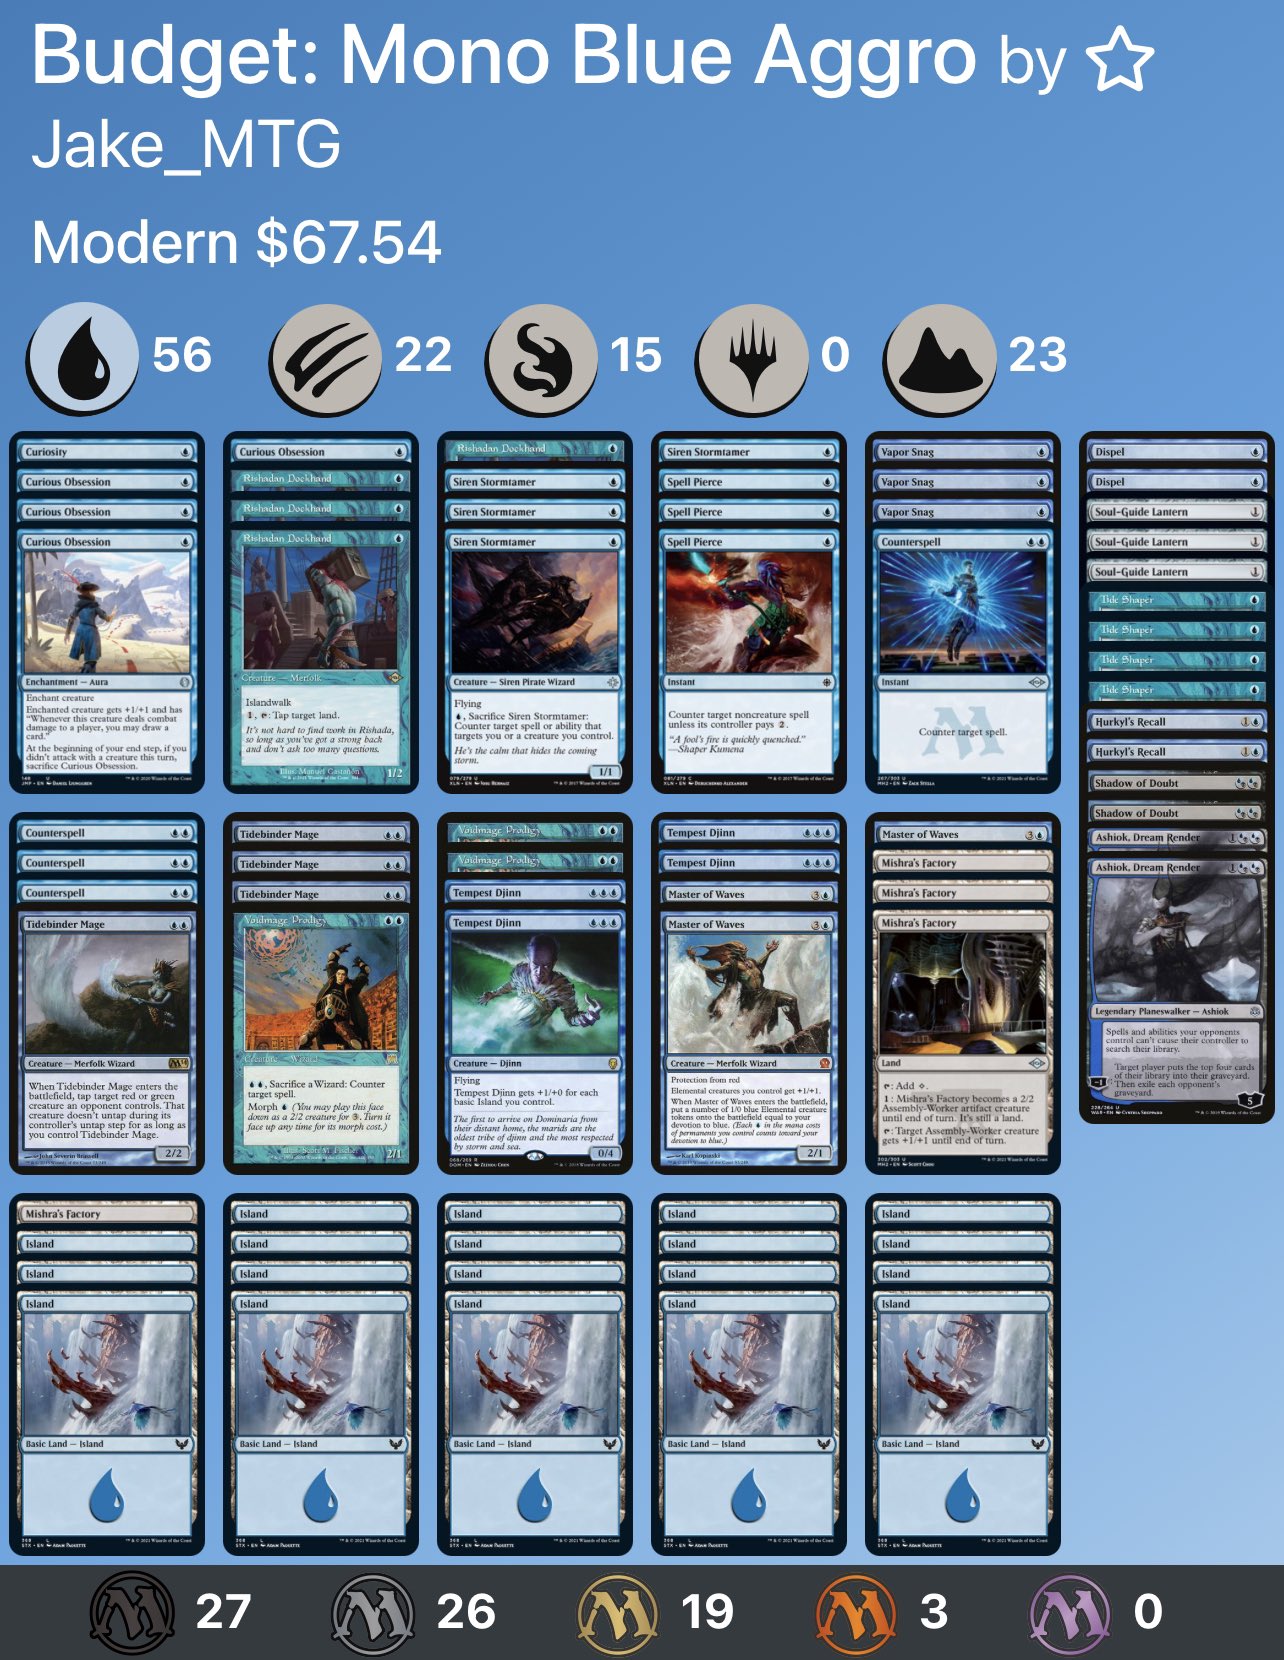 Jake MTG on X: Here's a fun Budget Mono Blue Aggro deck for